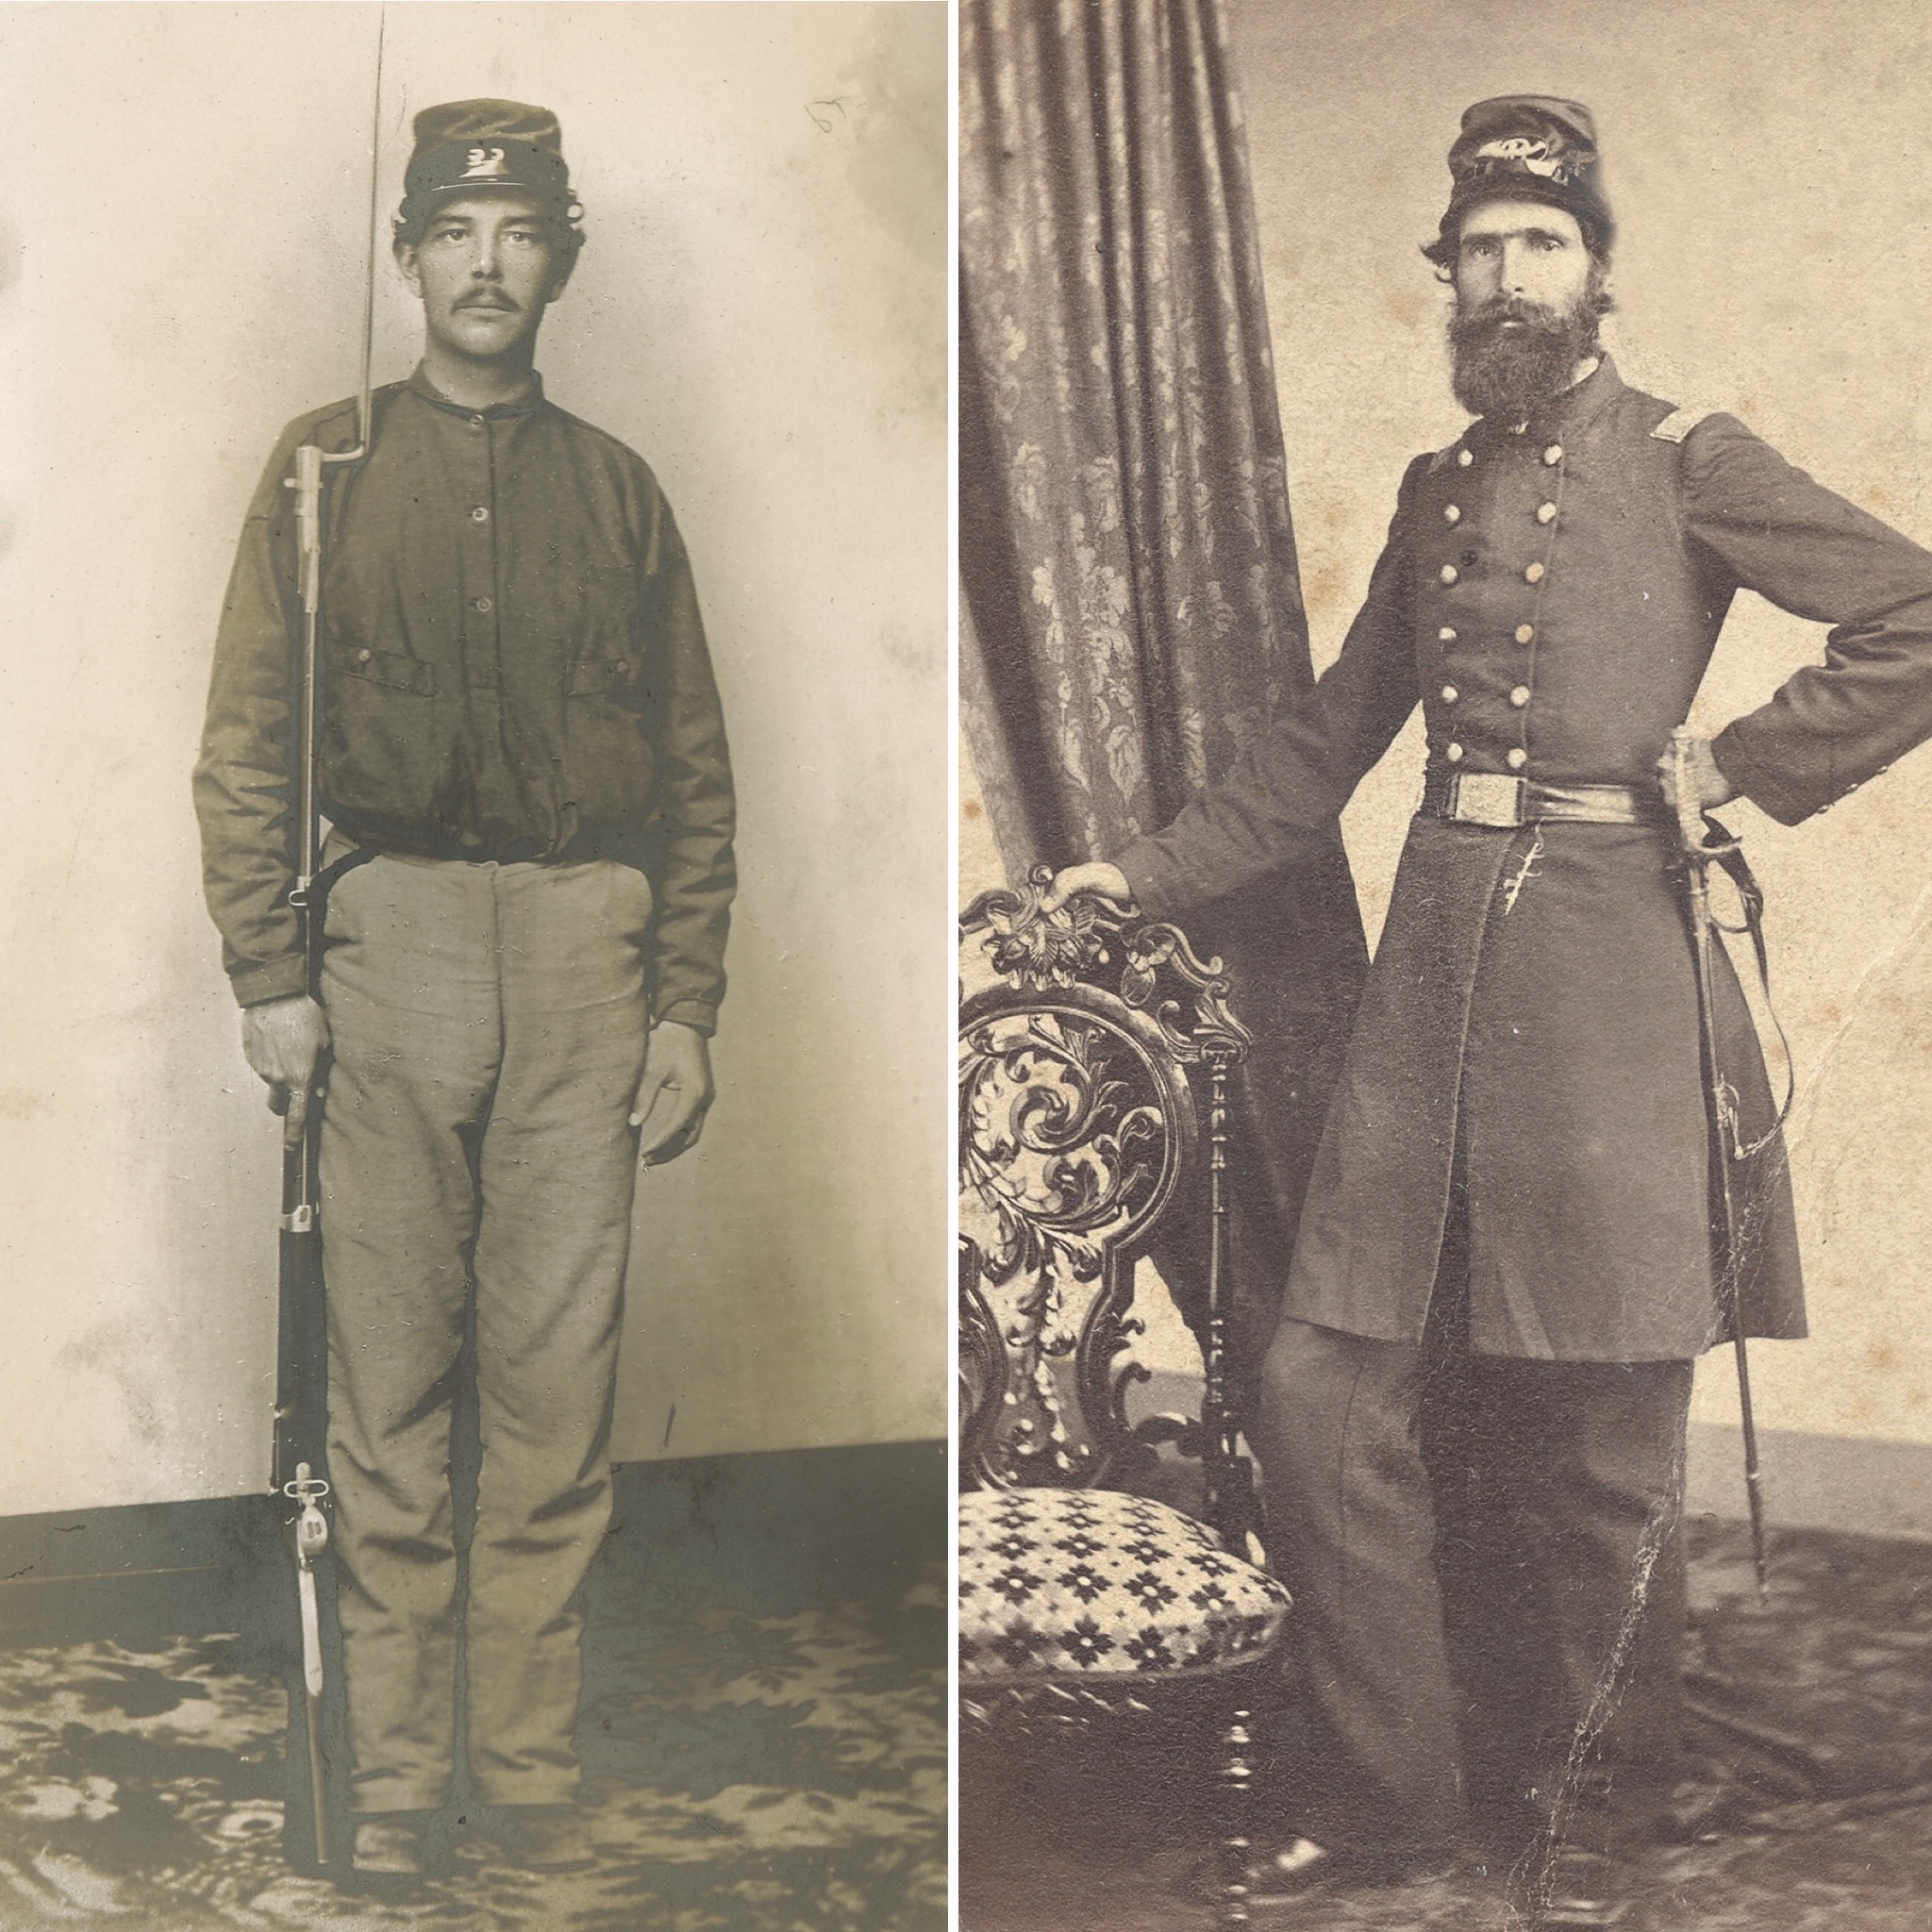 Corp. John Morton Booker (left), 23rd Virginia, killed. Lt. Col. Thomas Allen, 2nd Wisconsin, wounded in the right arm. (The Marc and Beth Storch Collection)